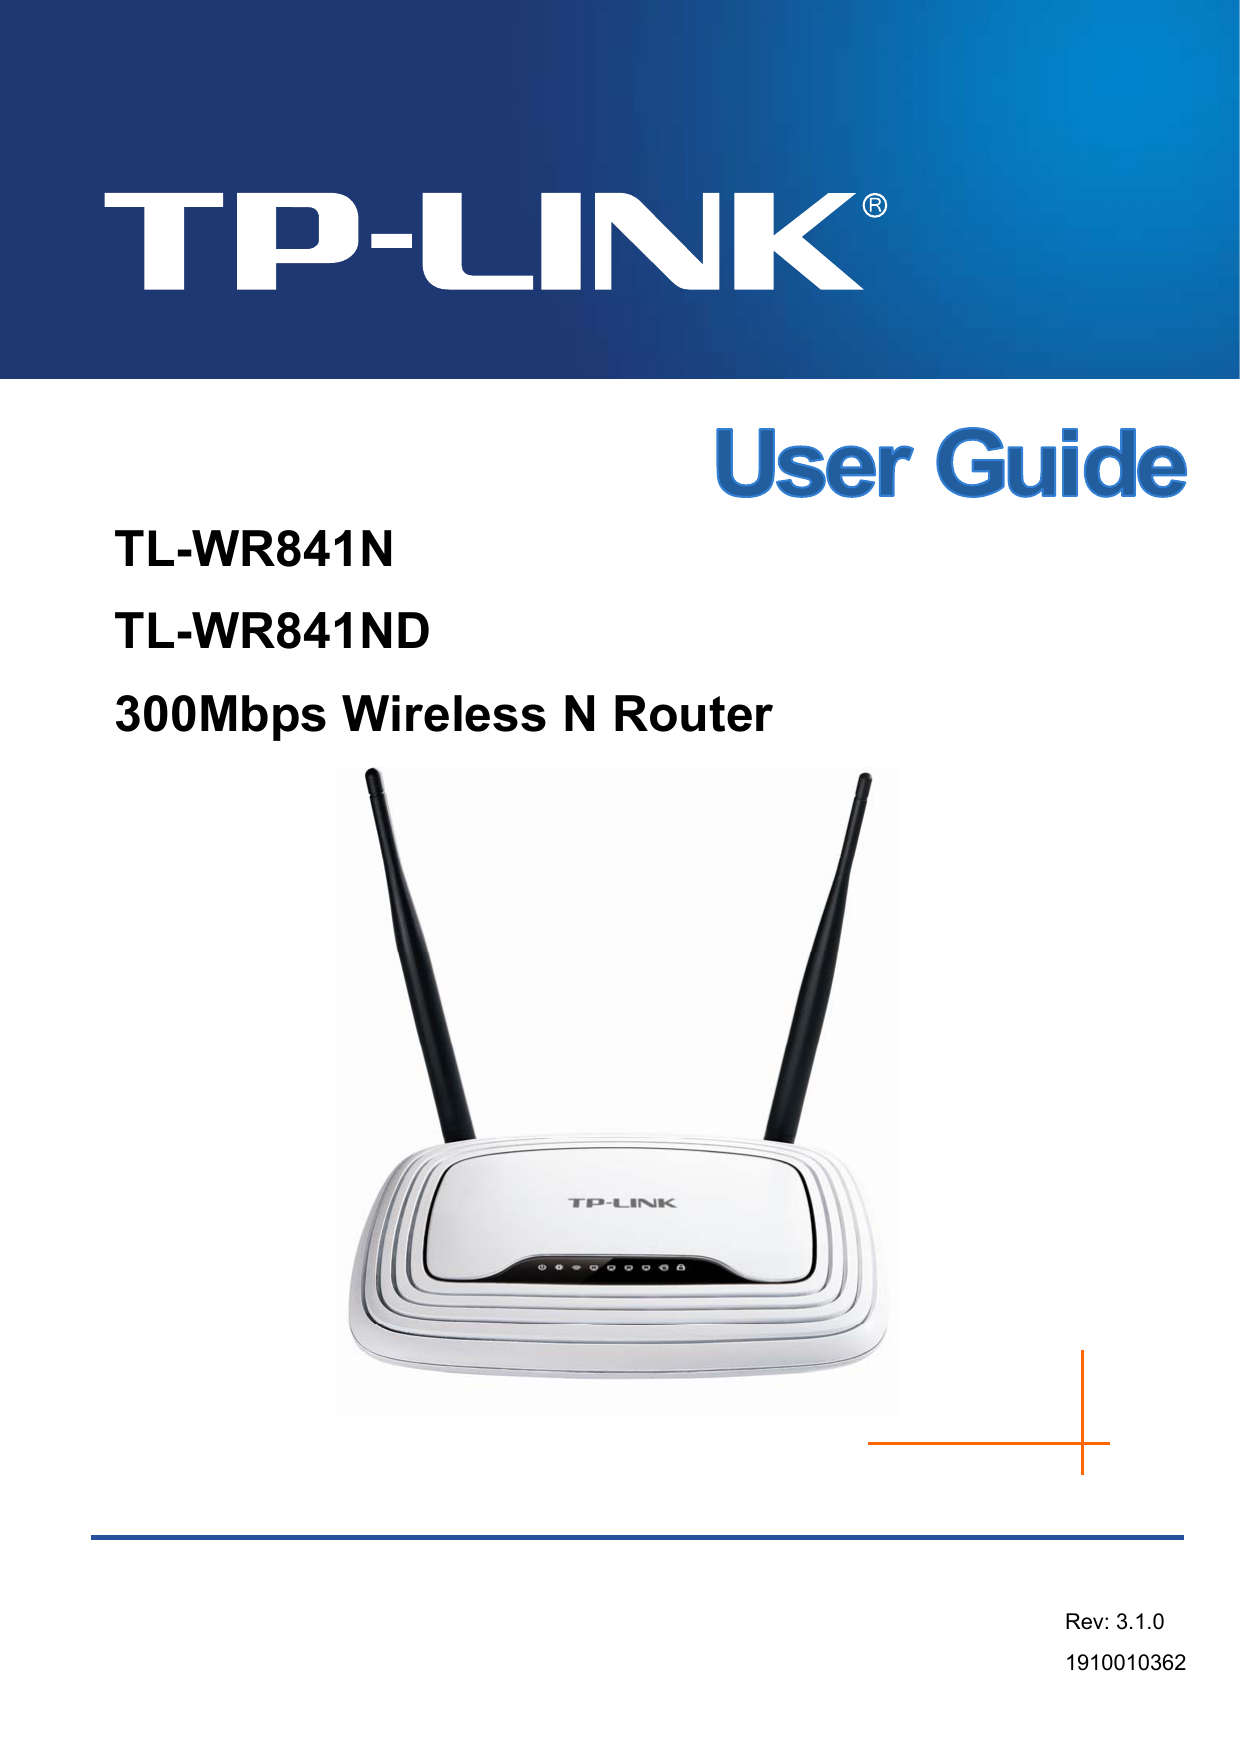   TL-WR841N TL-WR841ND 300Mbps Wireless N Router  Rev: 3.1.0 1910010362   